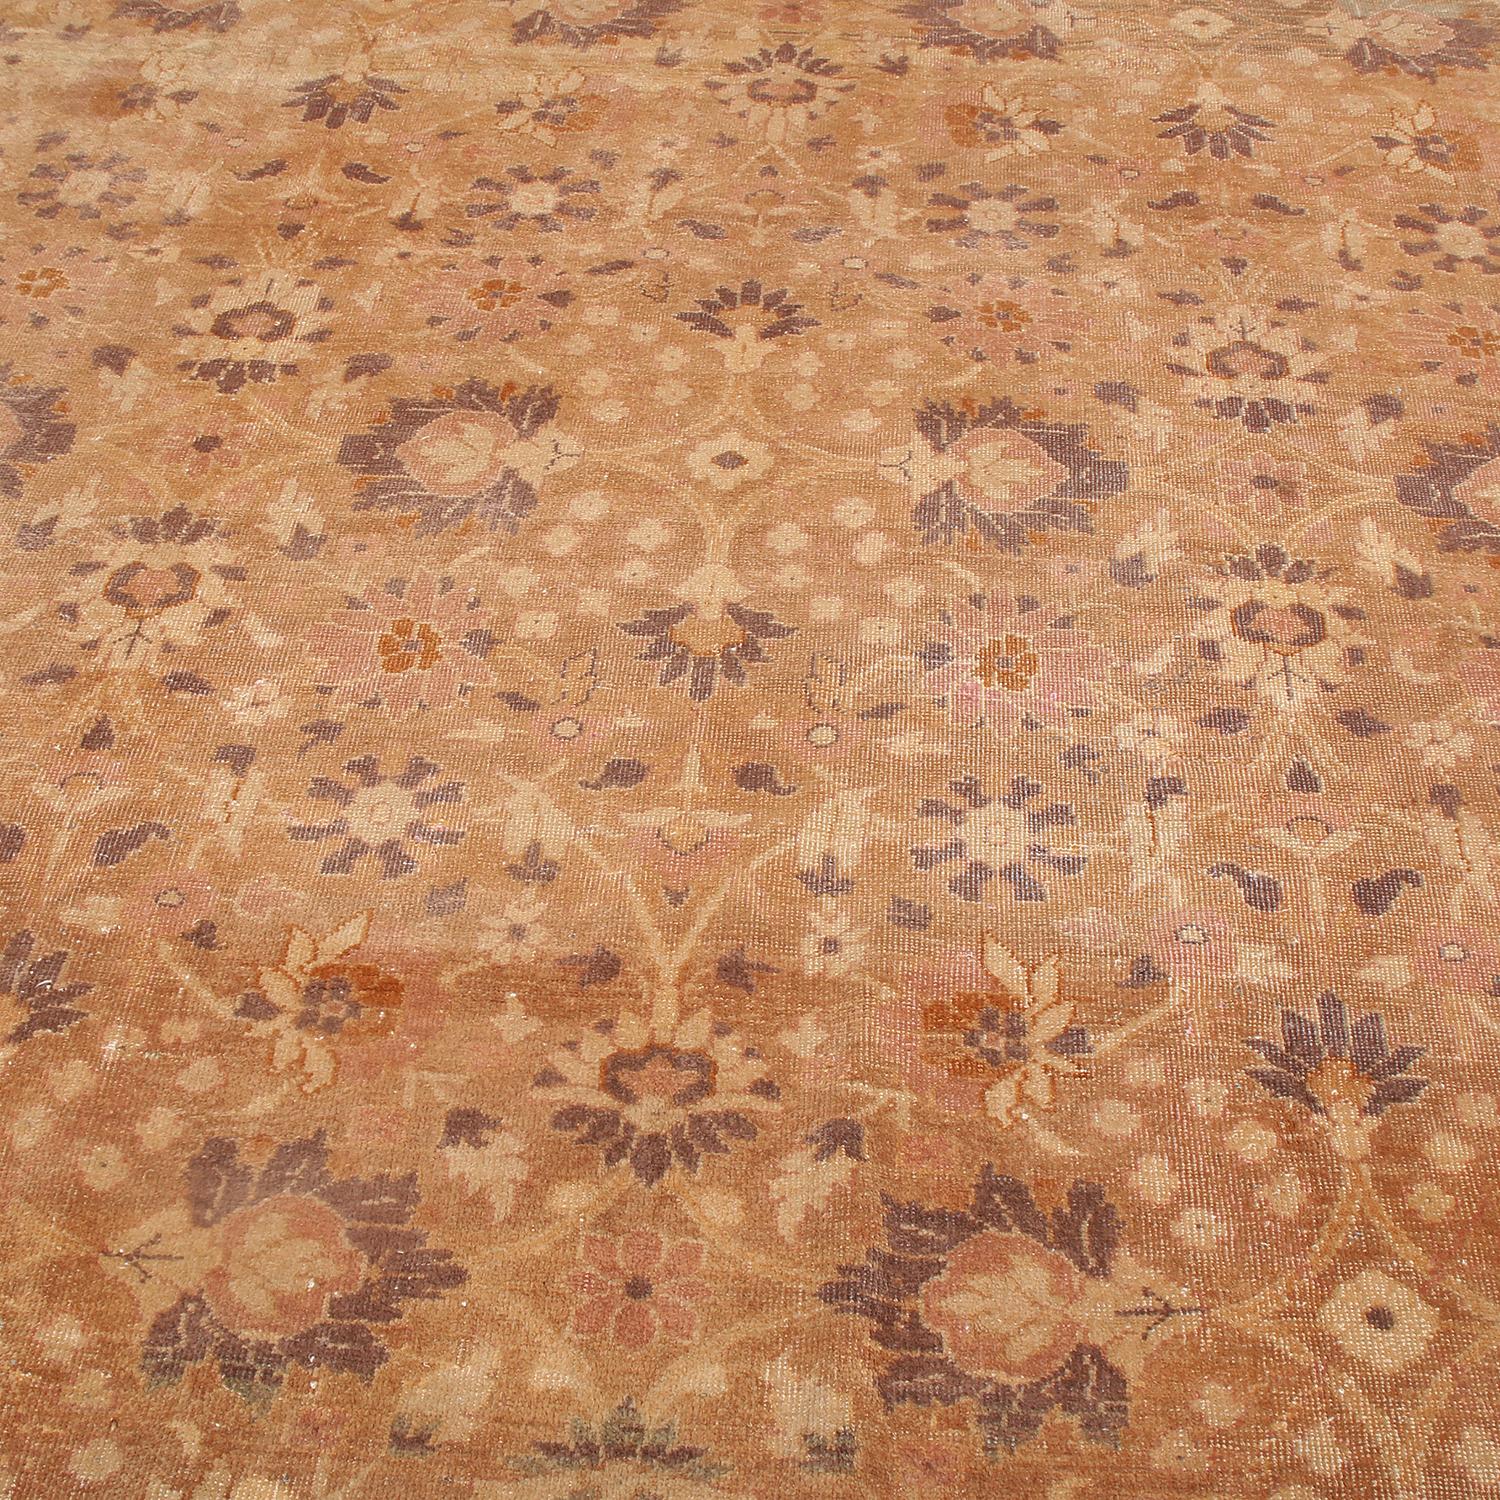 Hand-Knotted Antique Oushak Beige-Brown and Peach Wool Floral Rug